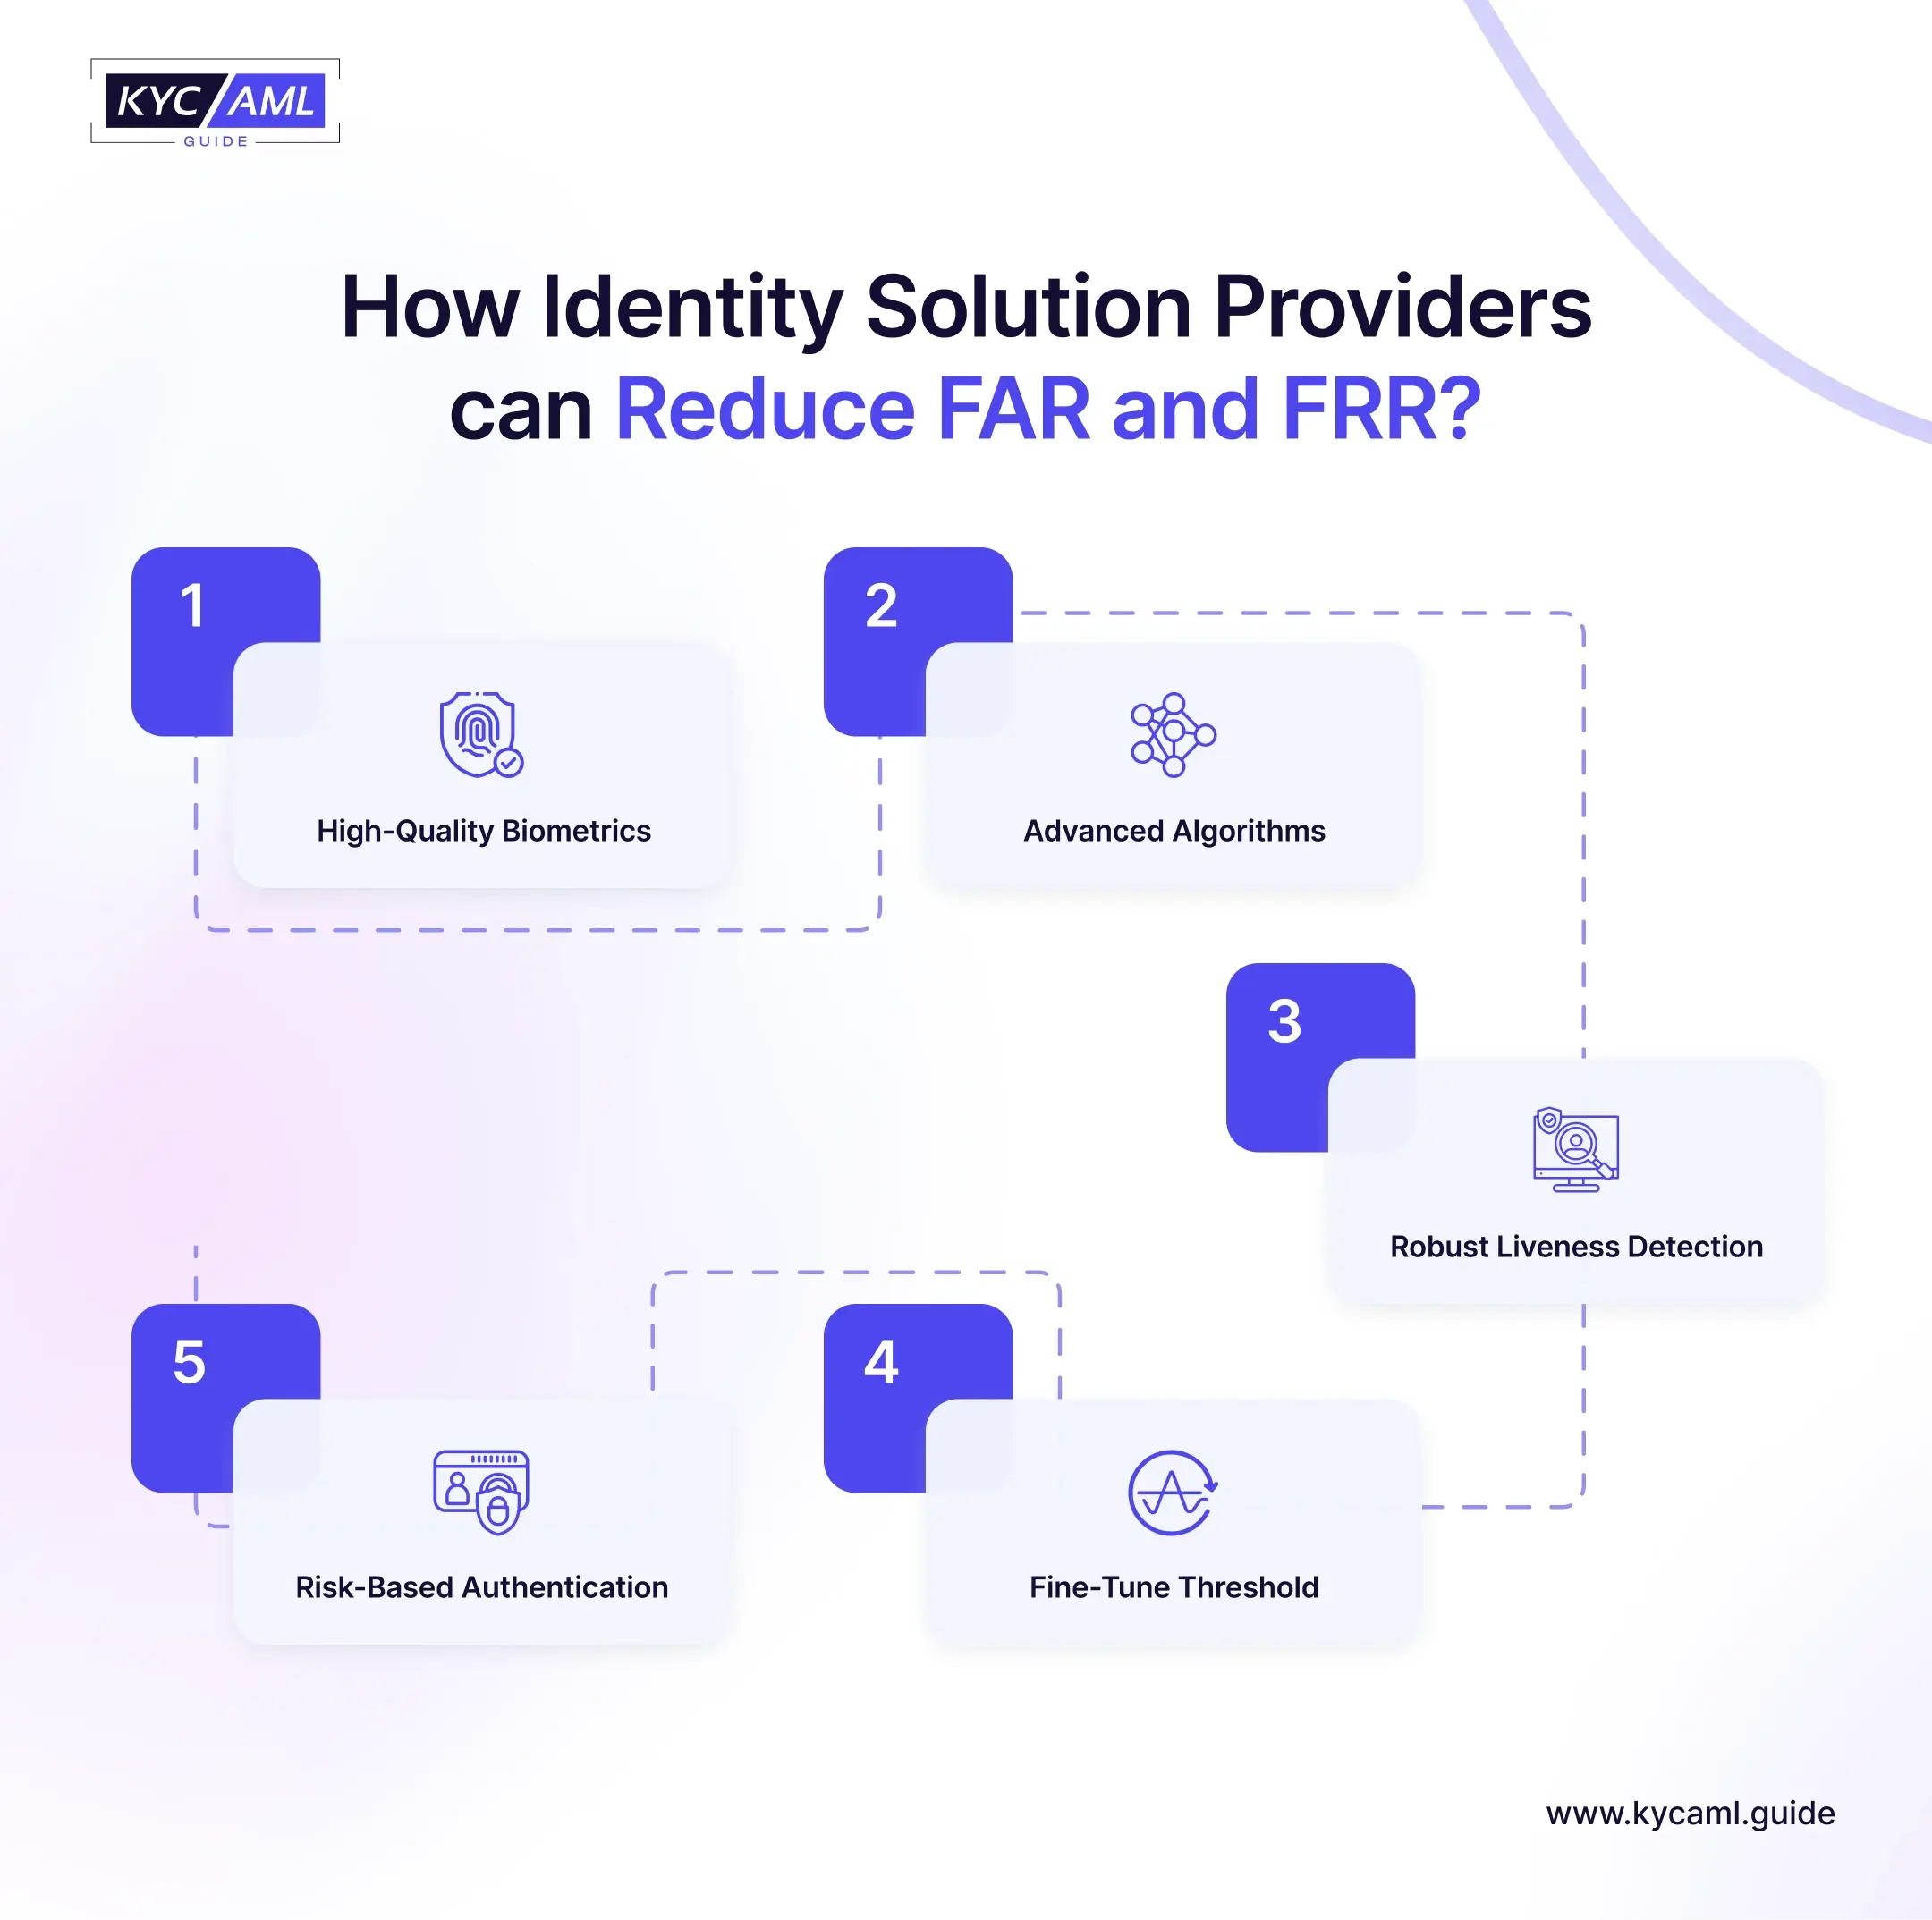 How Identity Solution Providers can Reduce FAR and FRR?